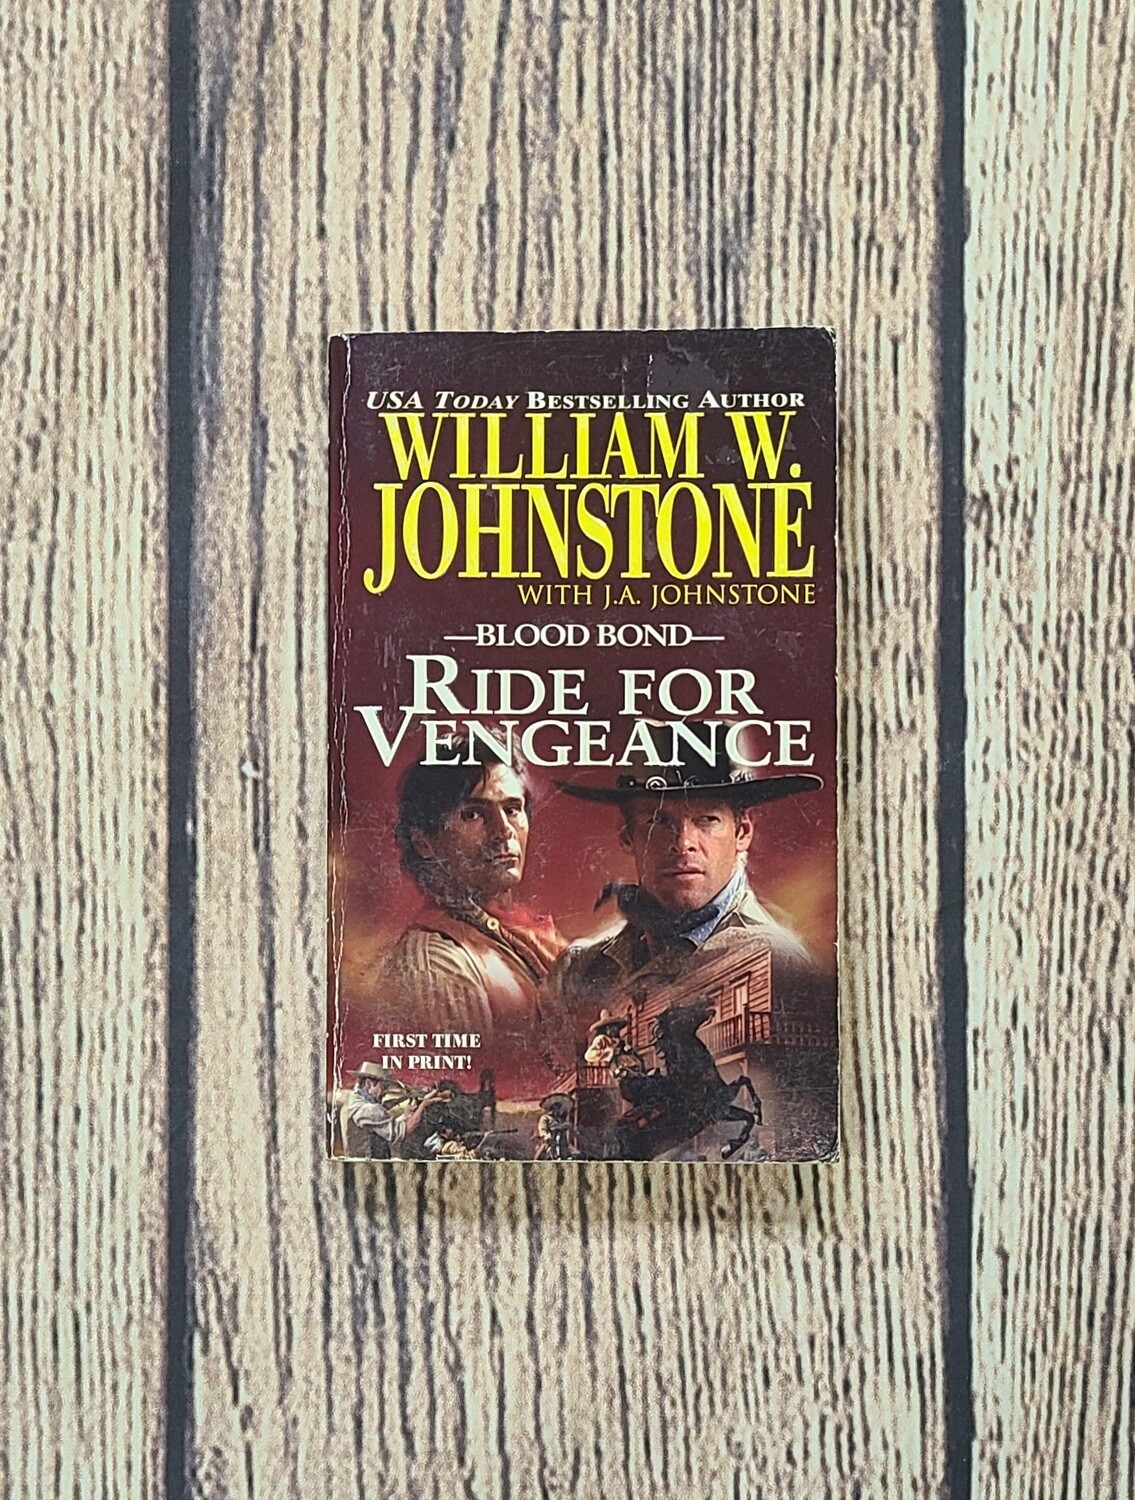 Blood Bond: Ride For Vengeance by William W. Johnstone with J.A. Johnstone